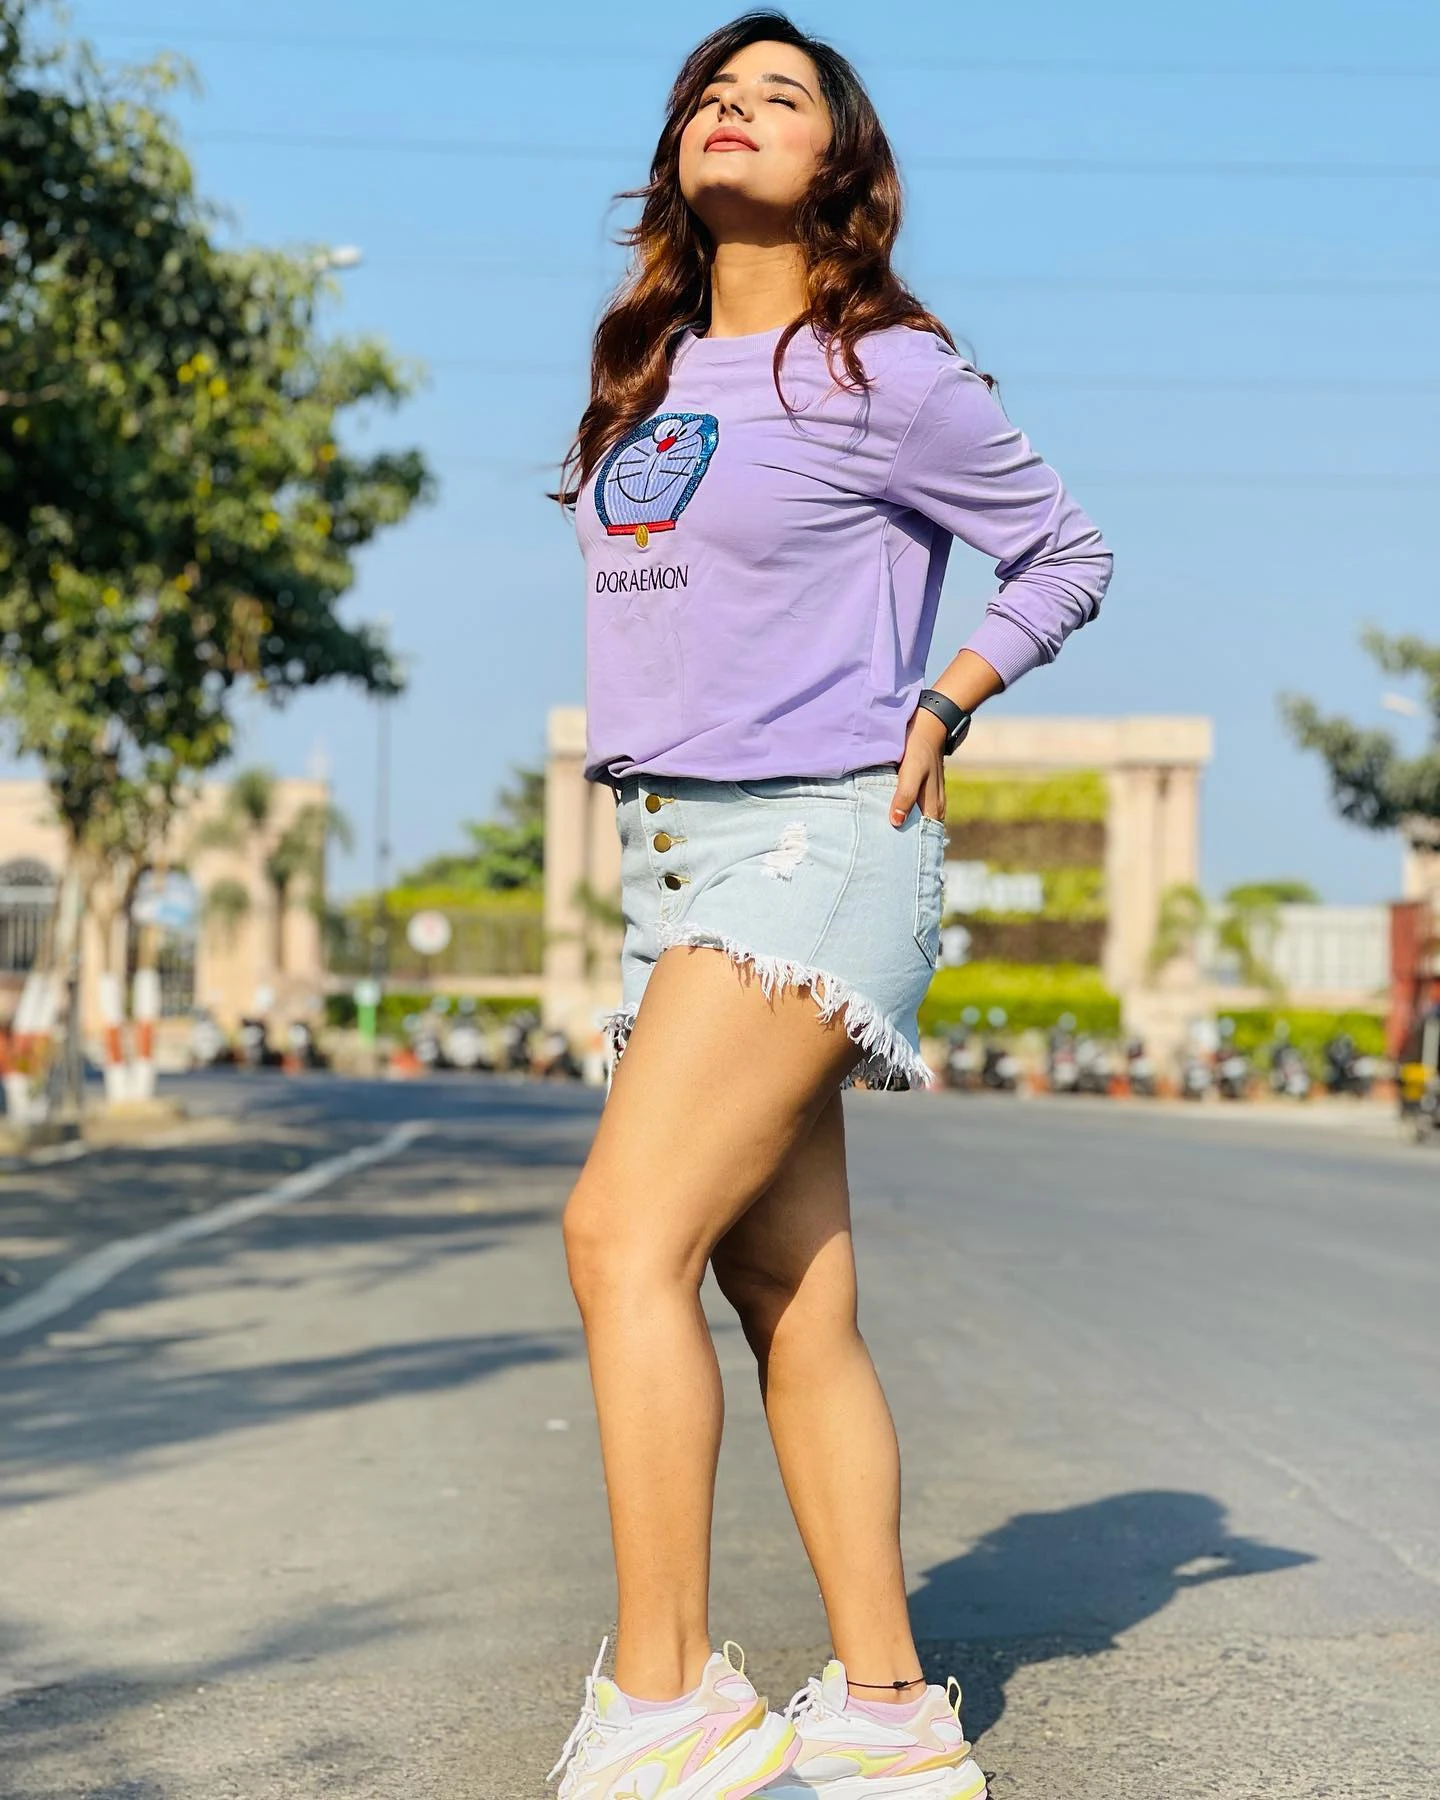 Anushka Srivastava latest hot And Gorgeous looks and sexy thighs in shorts